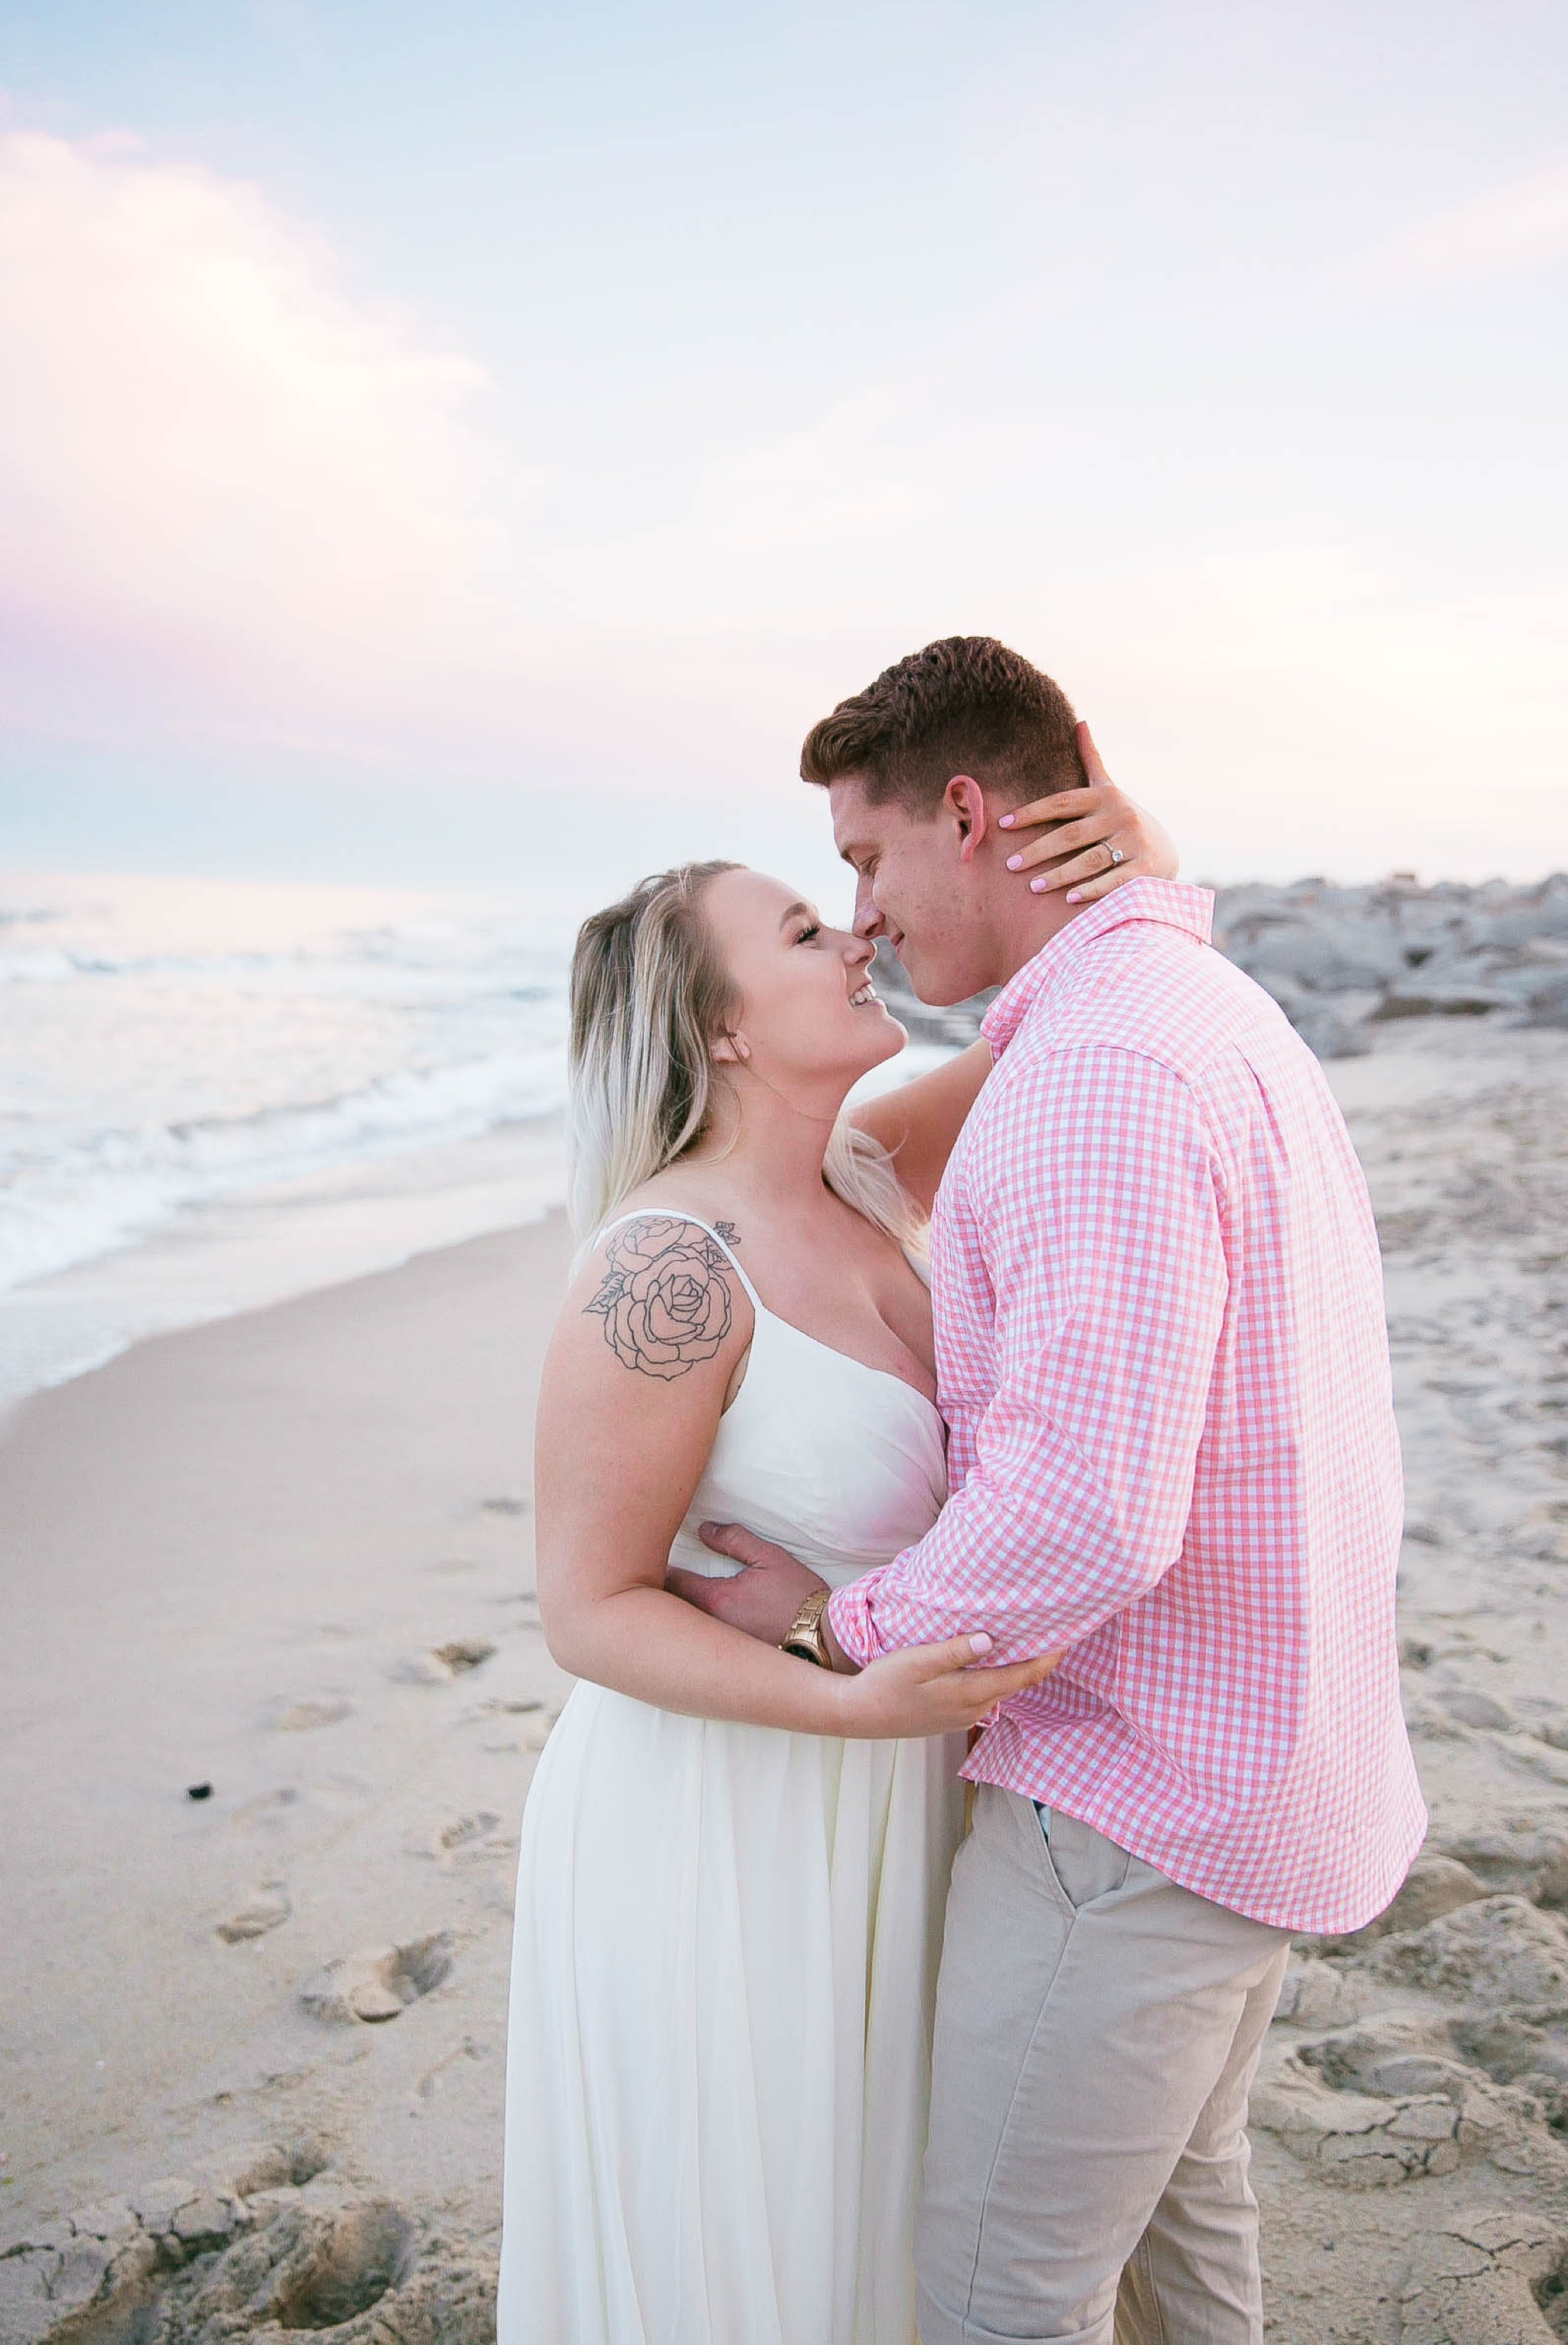  Romantic Engagement Photography Session at the beach during sunset with a cotton candy sky - guy is kissing his fiance - girl is wearing a white flowy maxi dress from lulus - Honolulu Oahu Hawaii Wedding Photographer - Johanna Dye 